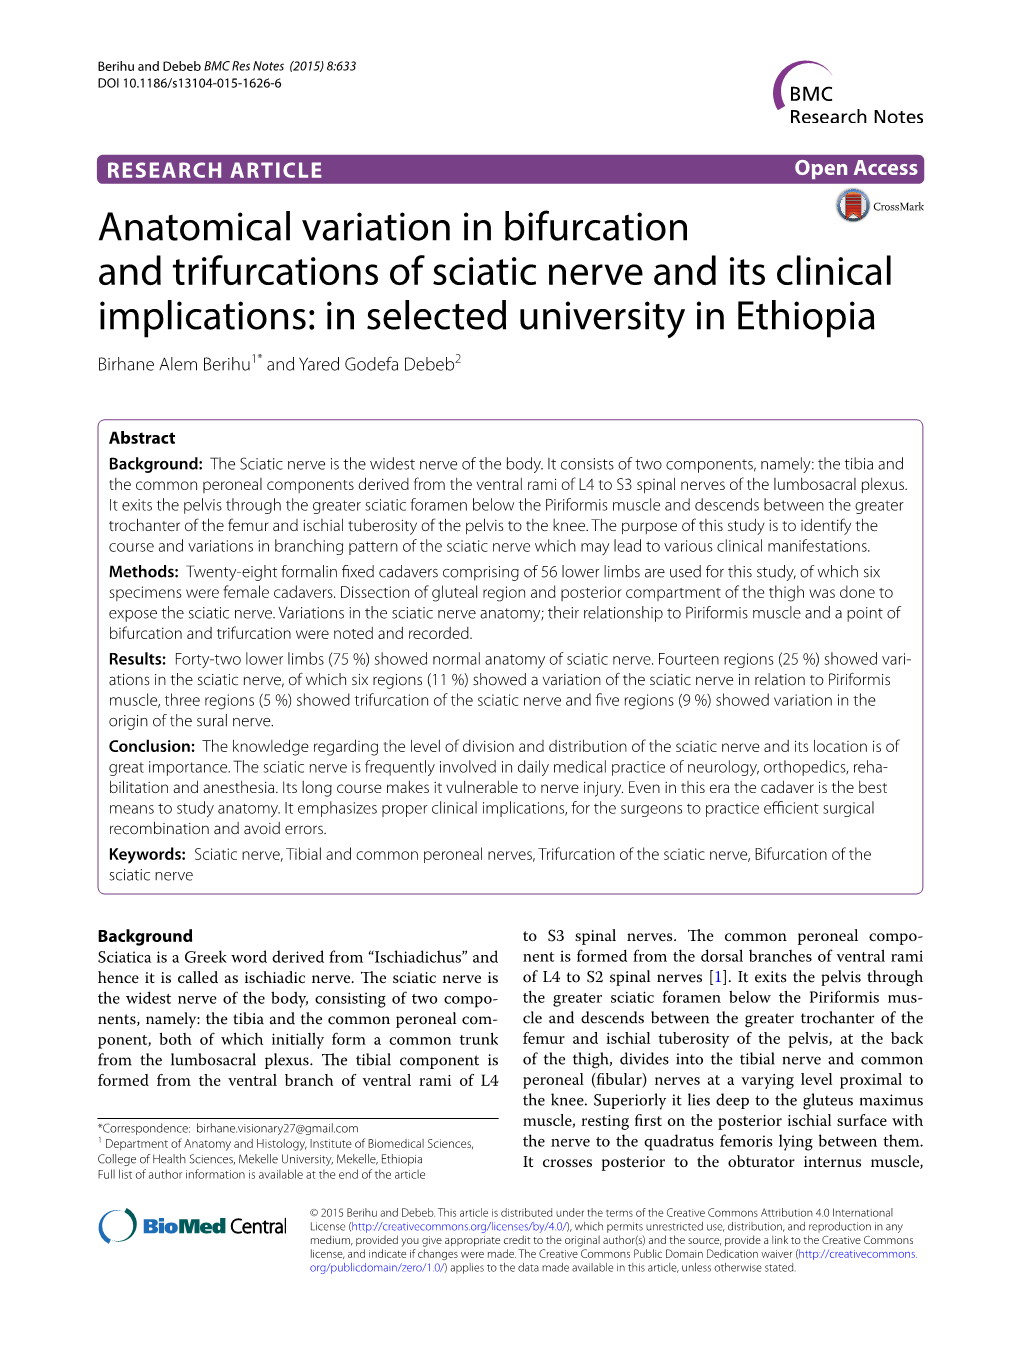 Anatomical Variation in Bifurcation and Trifurcations of Sciatic Nerve and Its